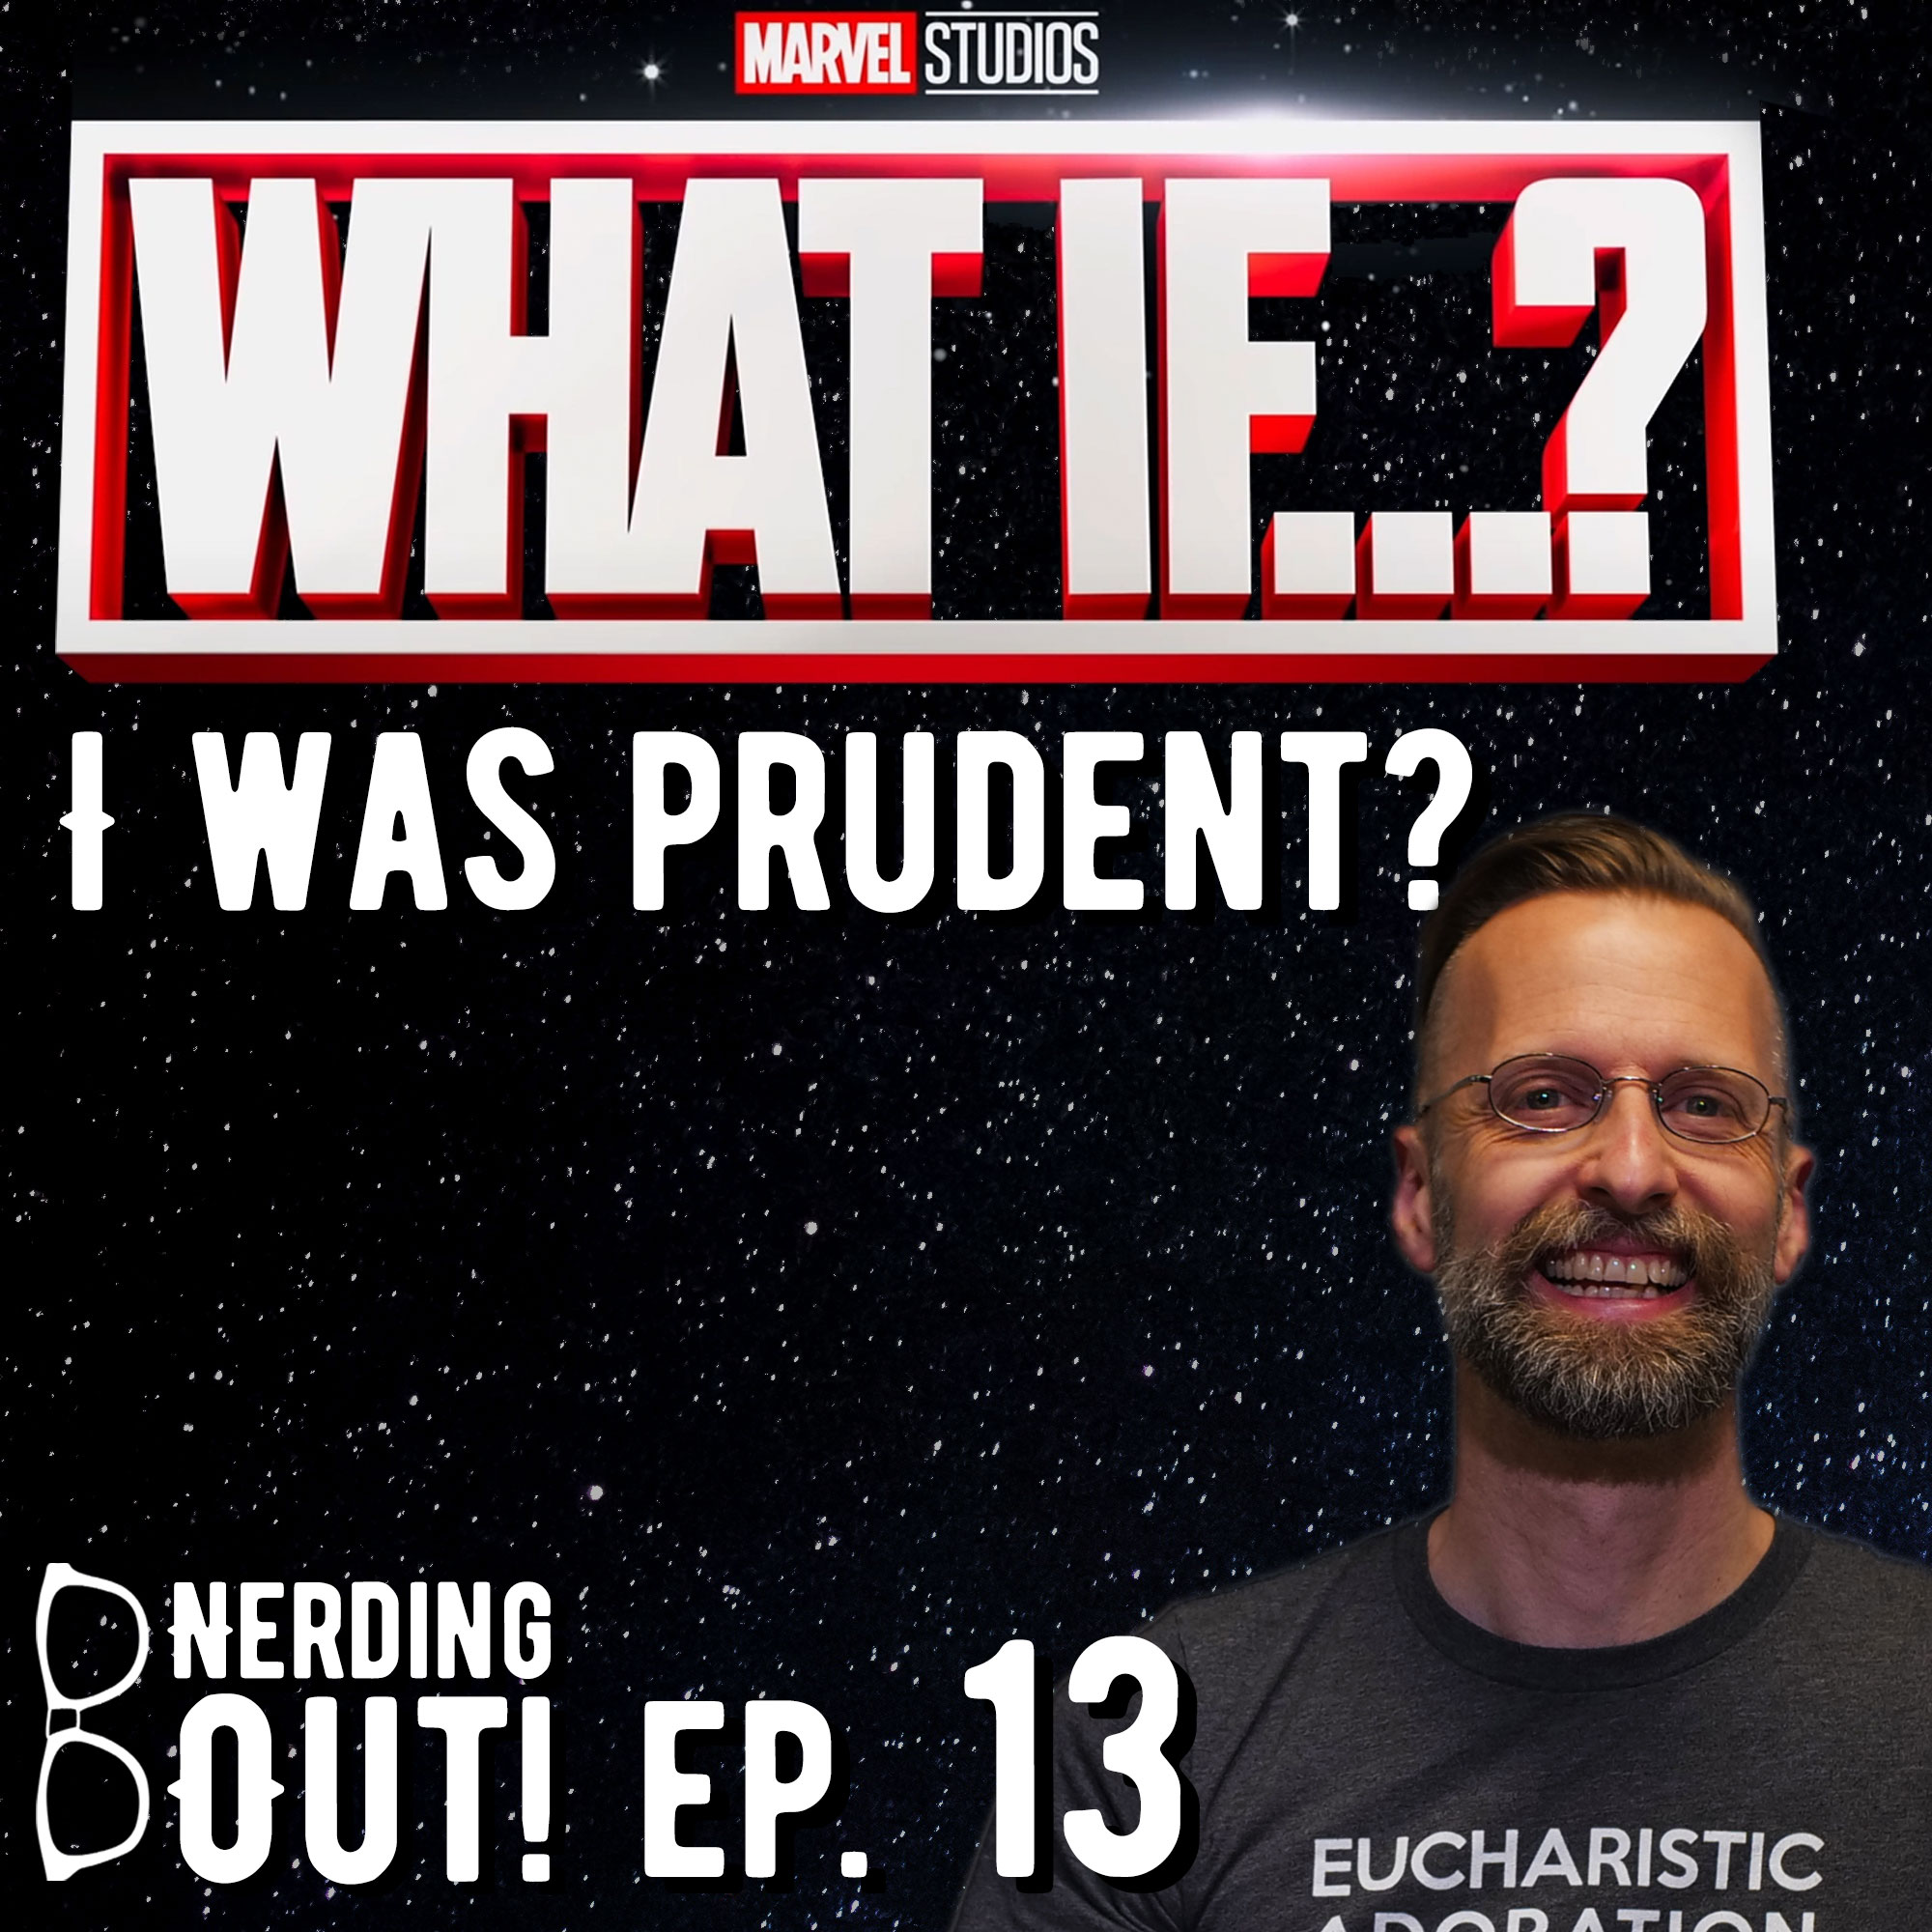 The Multiverse and Free Will, A Catholic What If – Nerding Out ep 13